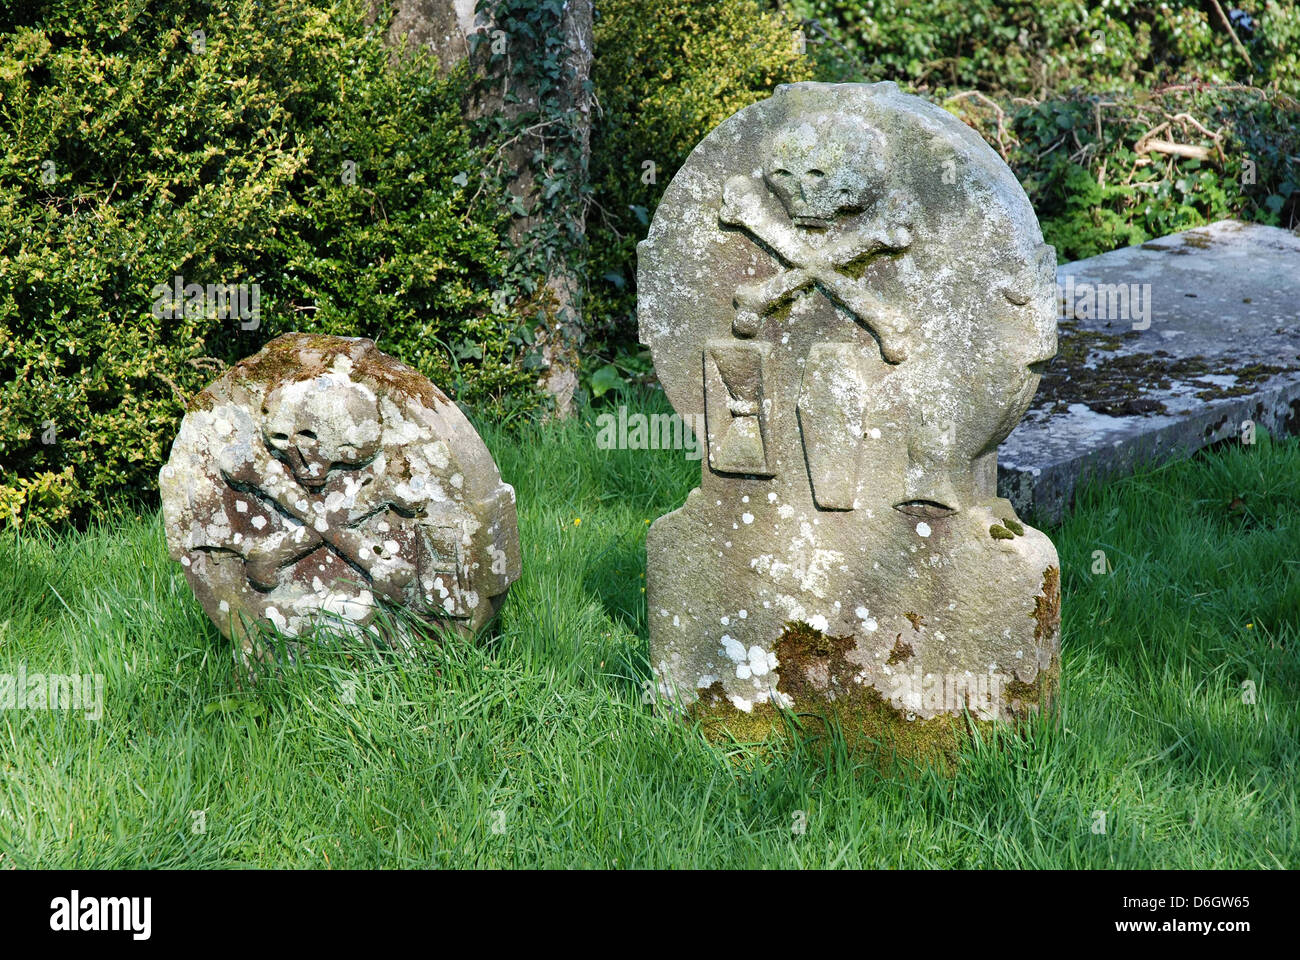 Galloon Island Cemetery with 18thC Skull and crossbones gravestone, Upper Lough Erne, County Fermanagh, Northern Ireland Stock Photo